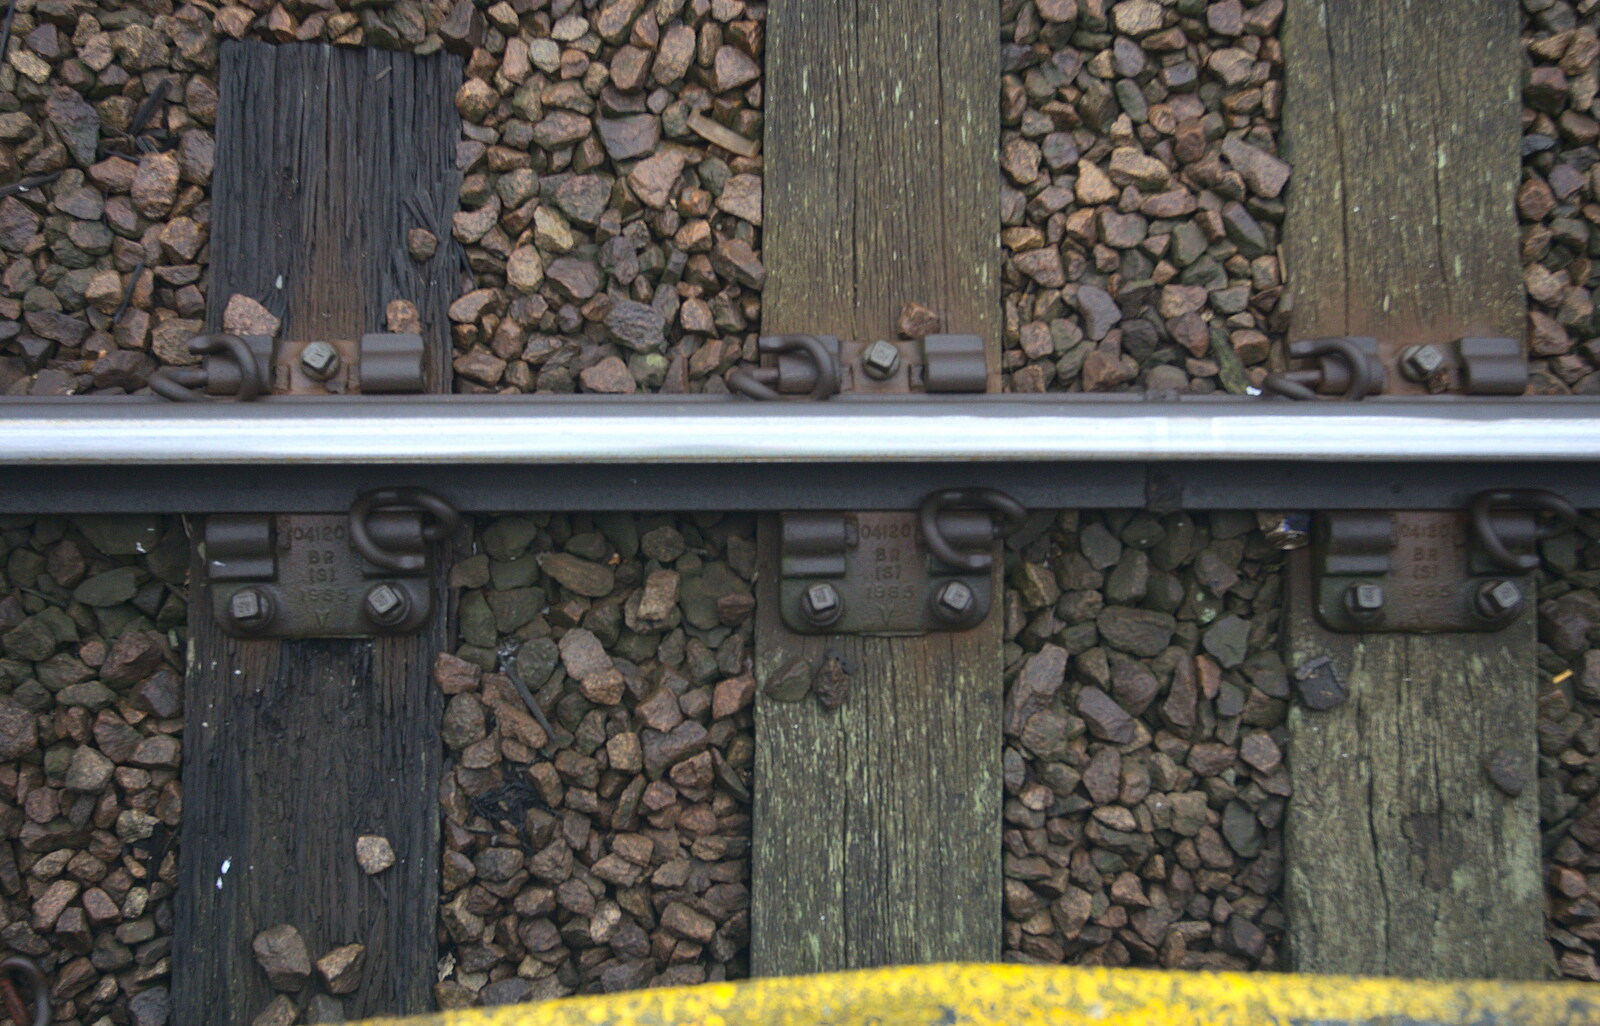 Rails set in wooden sleepers from The Demolition of the Bacon Factory, Ipswich, Suffolk - 20th February 2013